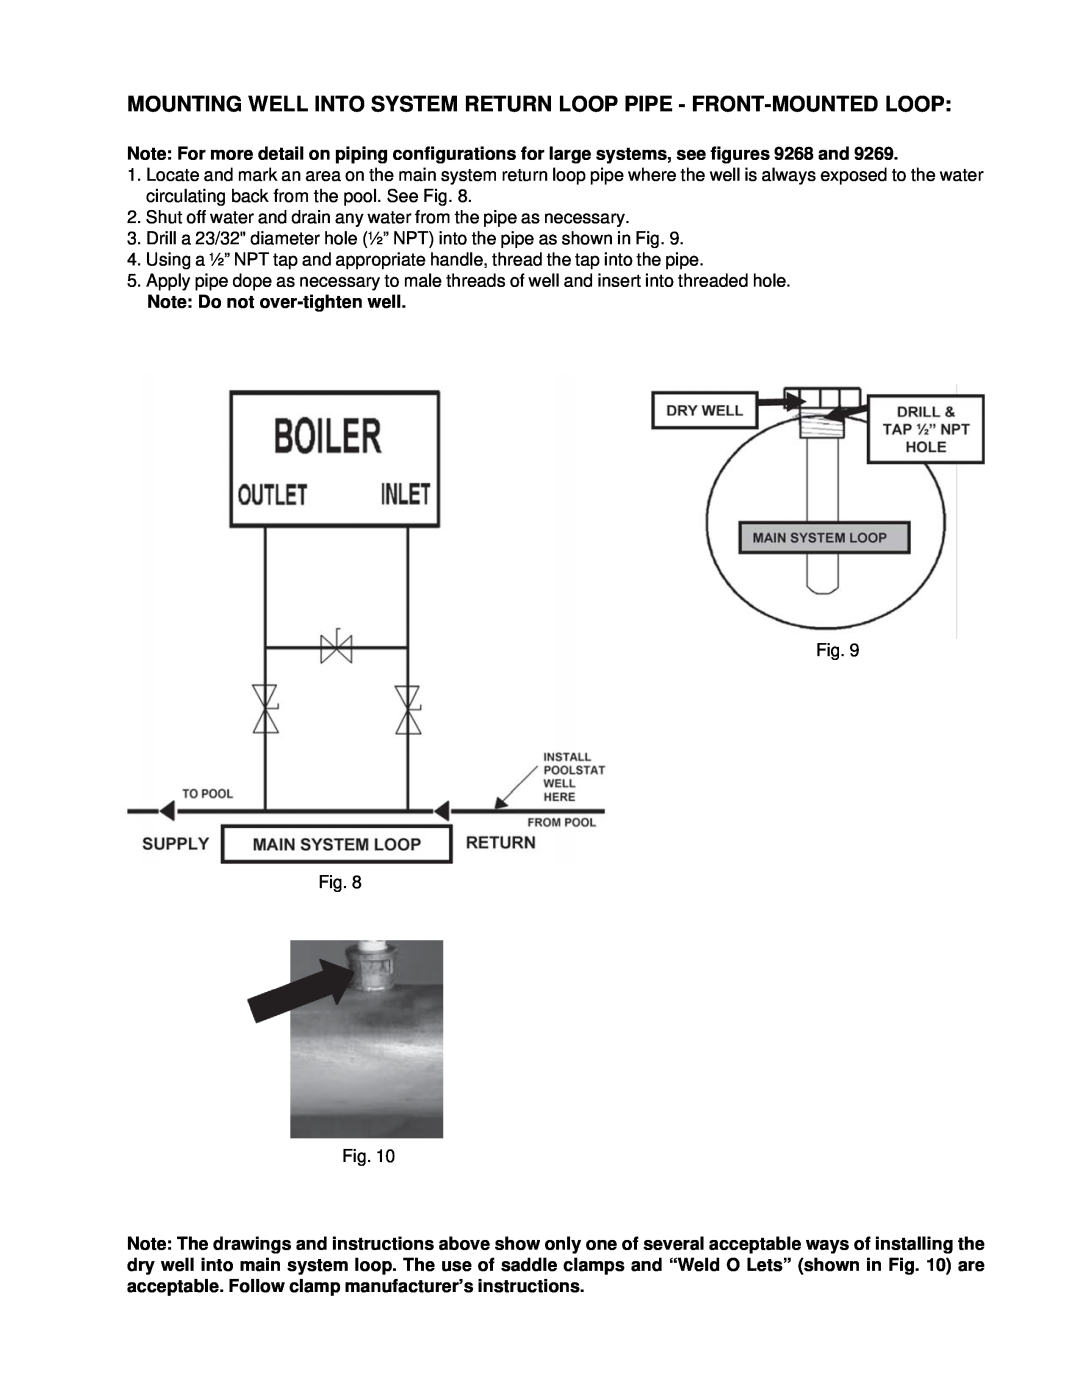 Raypak P926, P1826, P2100, P4001, 1287-1758, 2100-4001 Mounting Well Into System Return Loop Pipe - Front-Mounted Loop 